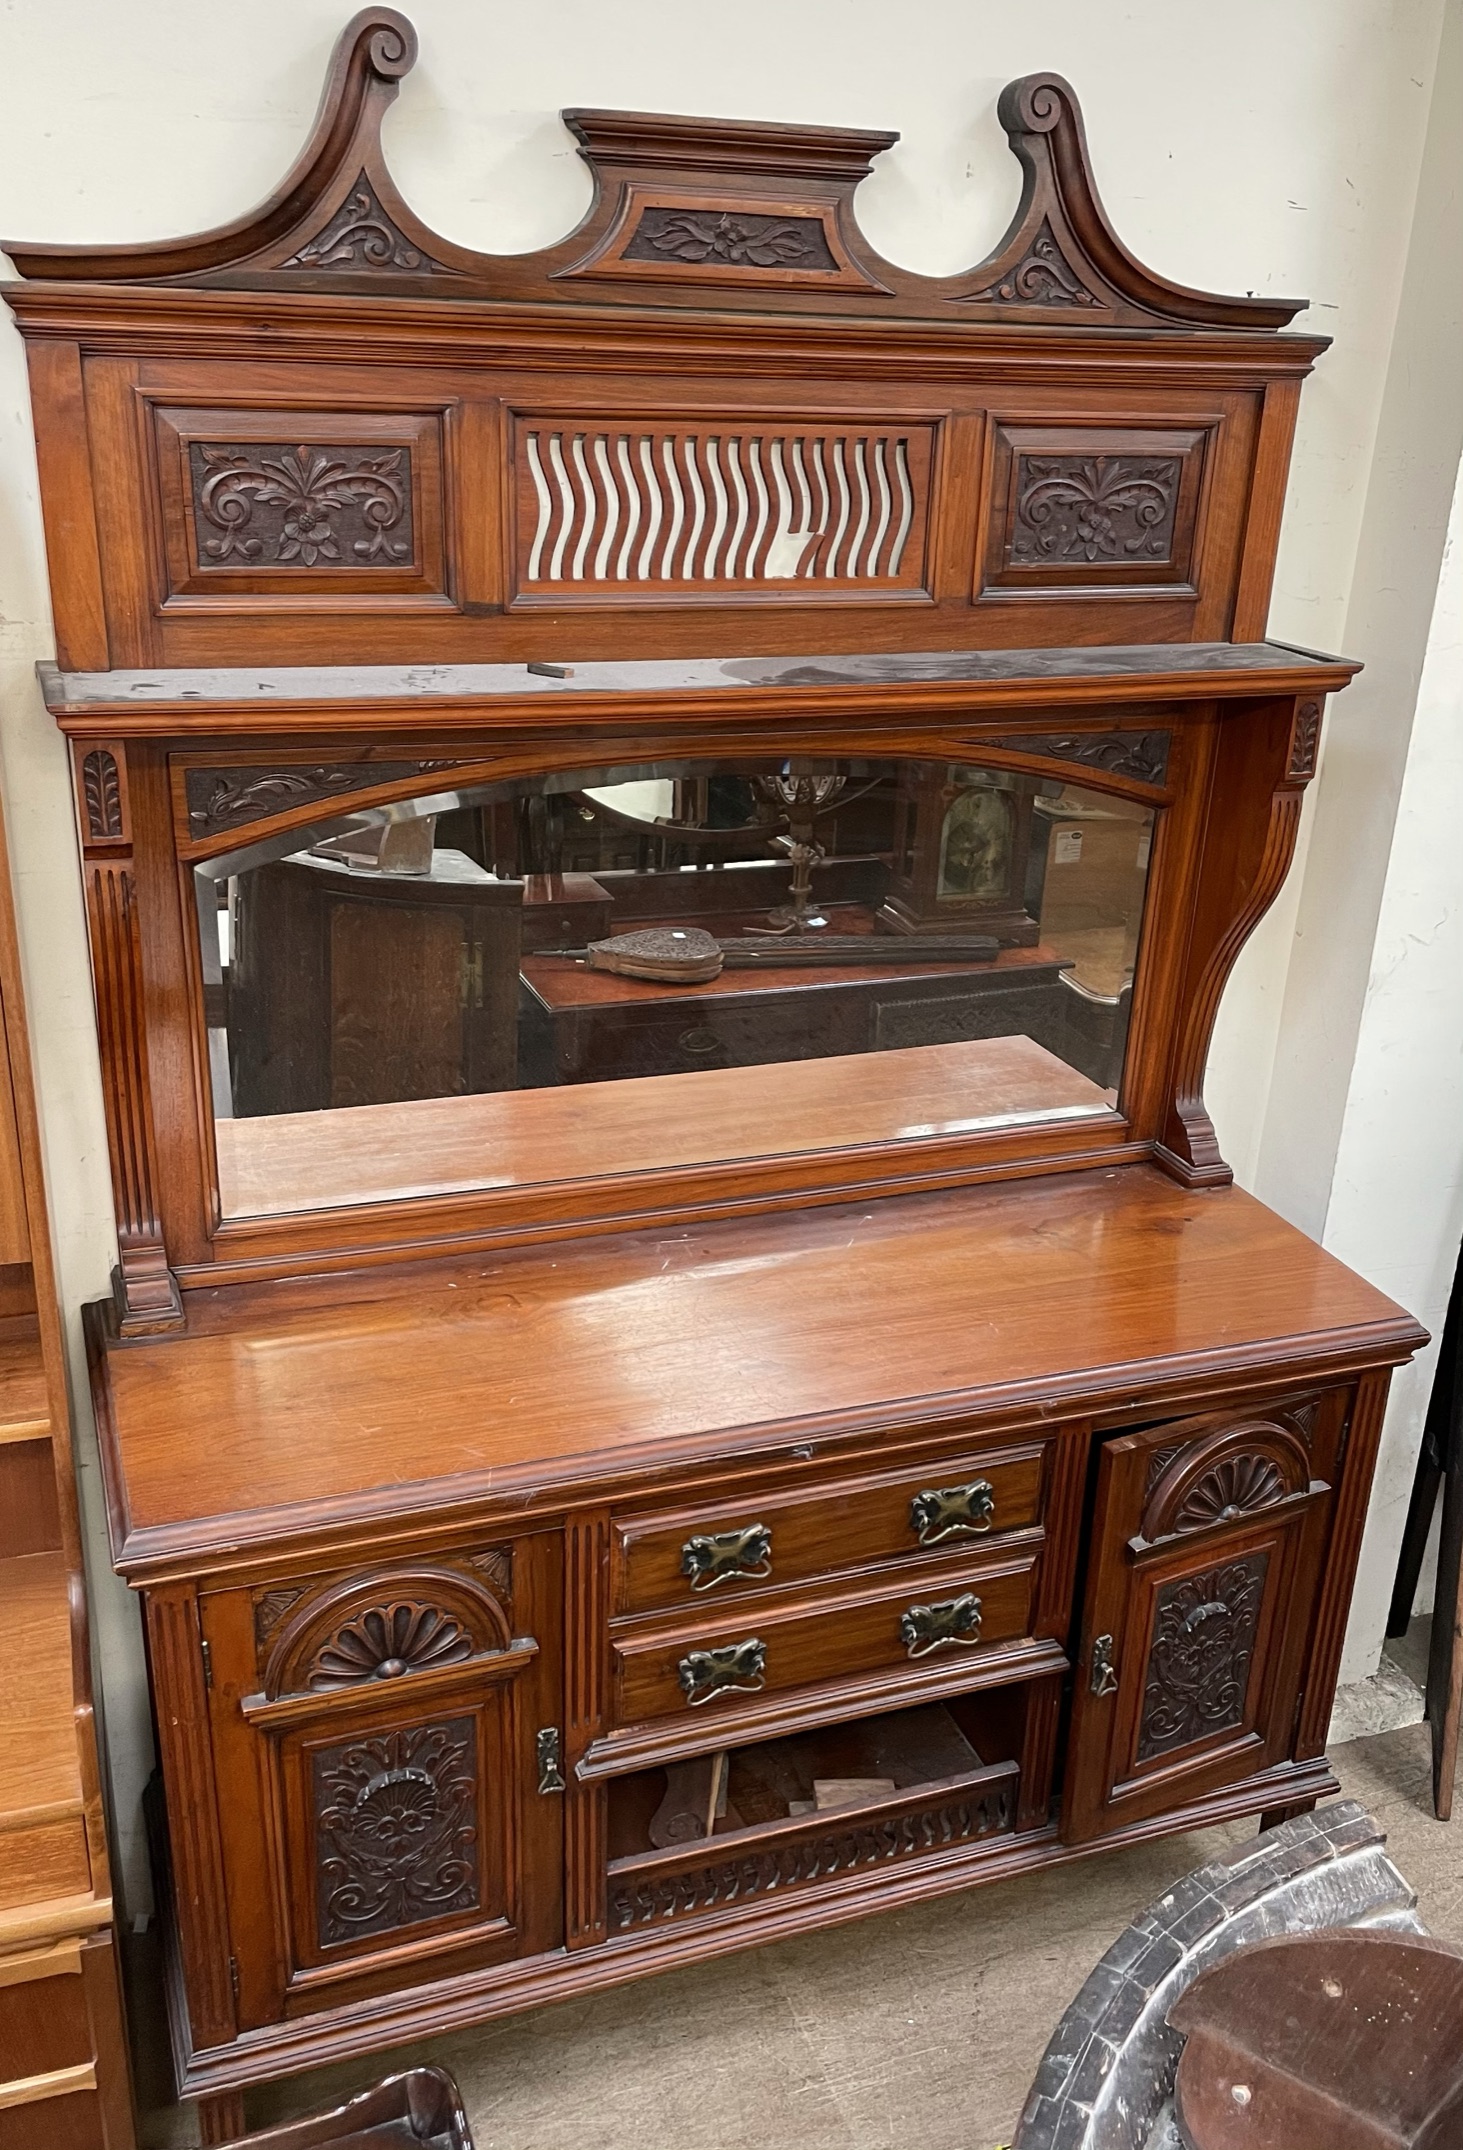 An Edwardian walnut mirrorback sideboard, with a carved cresting, shelf and arched mirror,